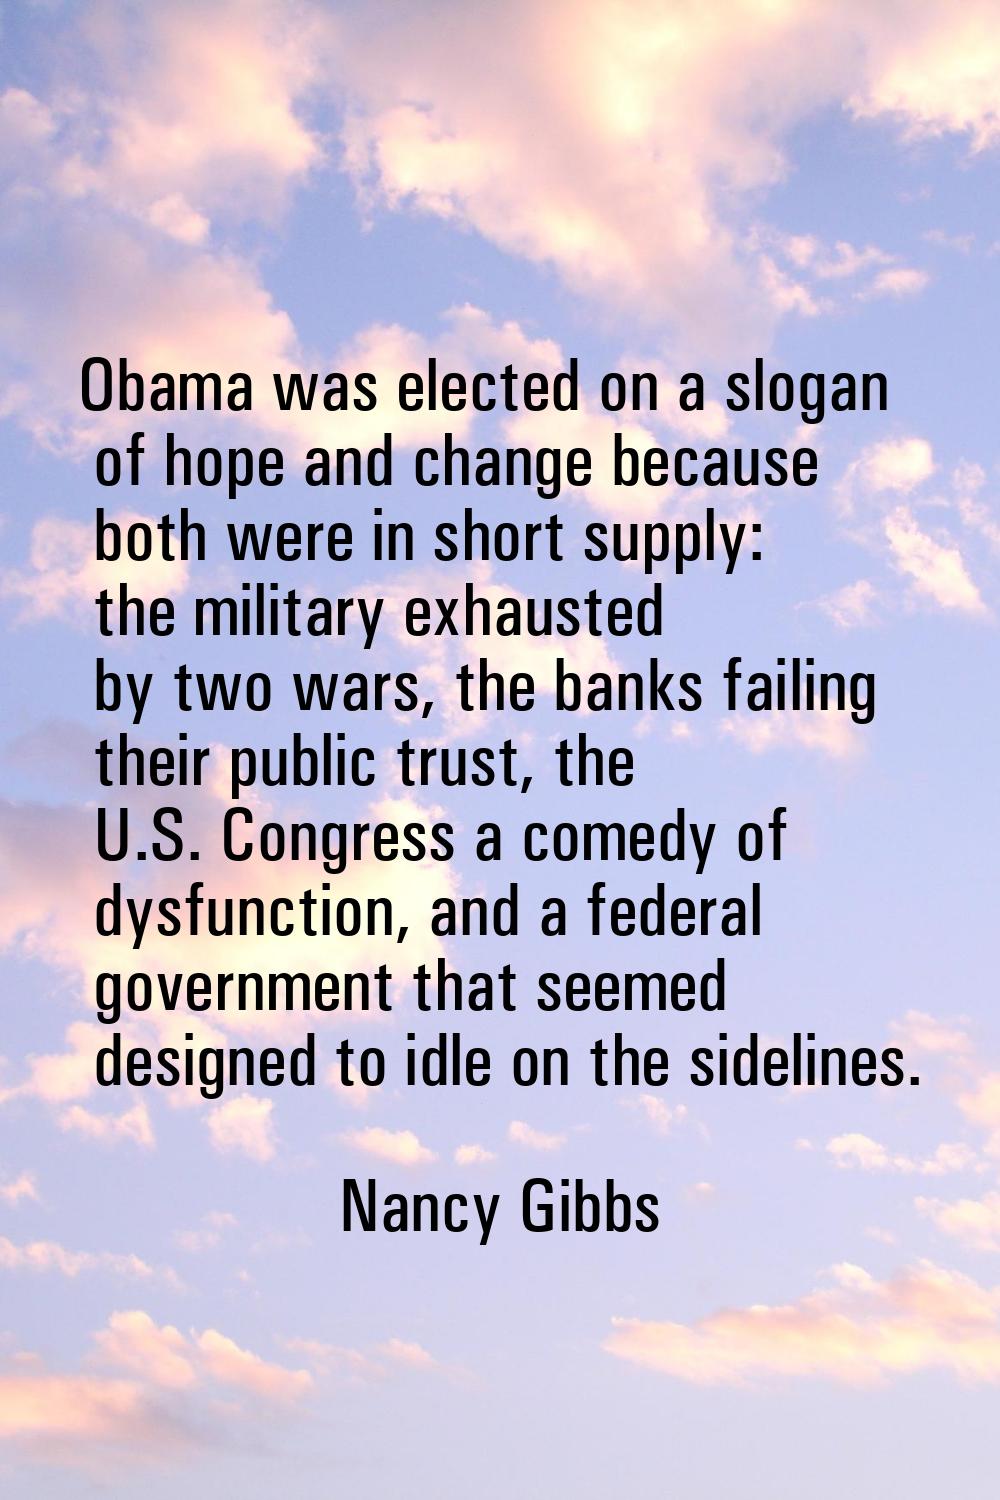 Obama was elected on a slogan of hope and change because both were in short supply: the military ex